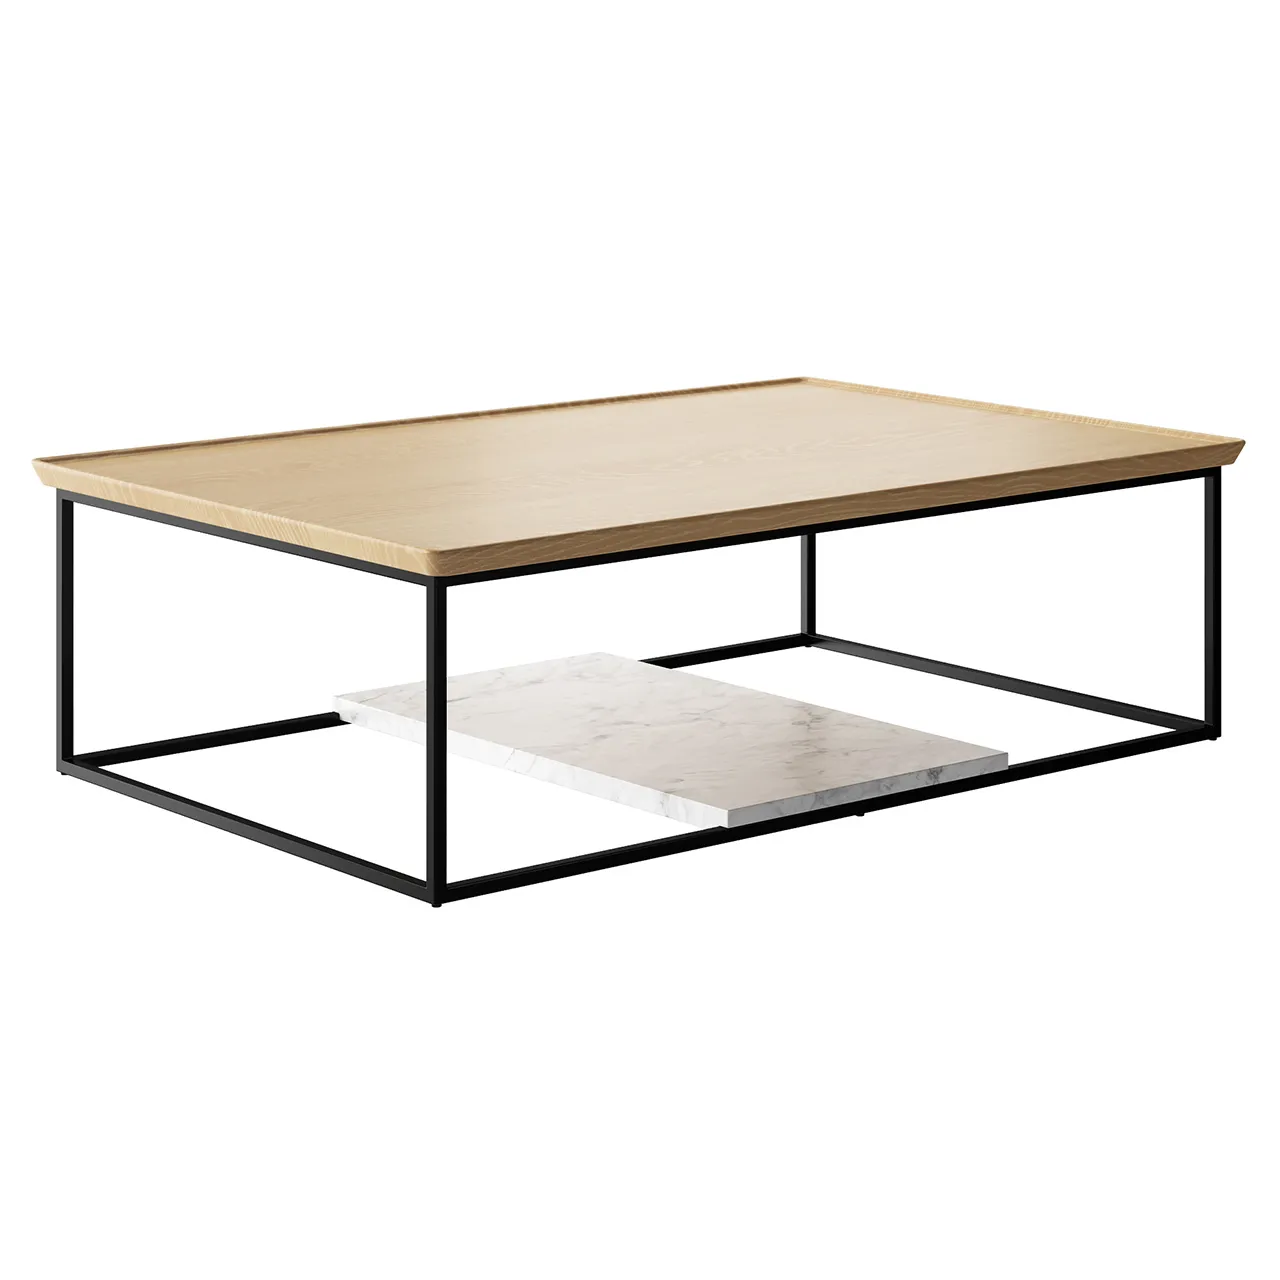 Furniture – 934-rectangular-coffee-table-by-rolf-benz